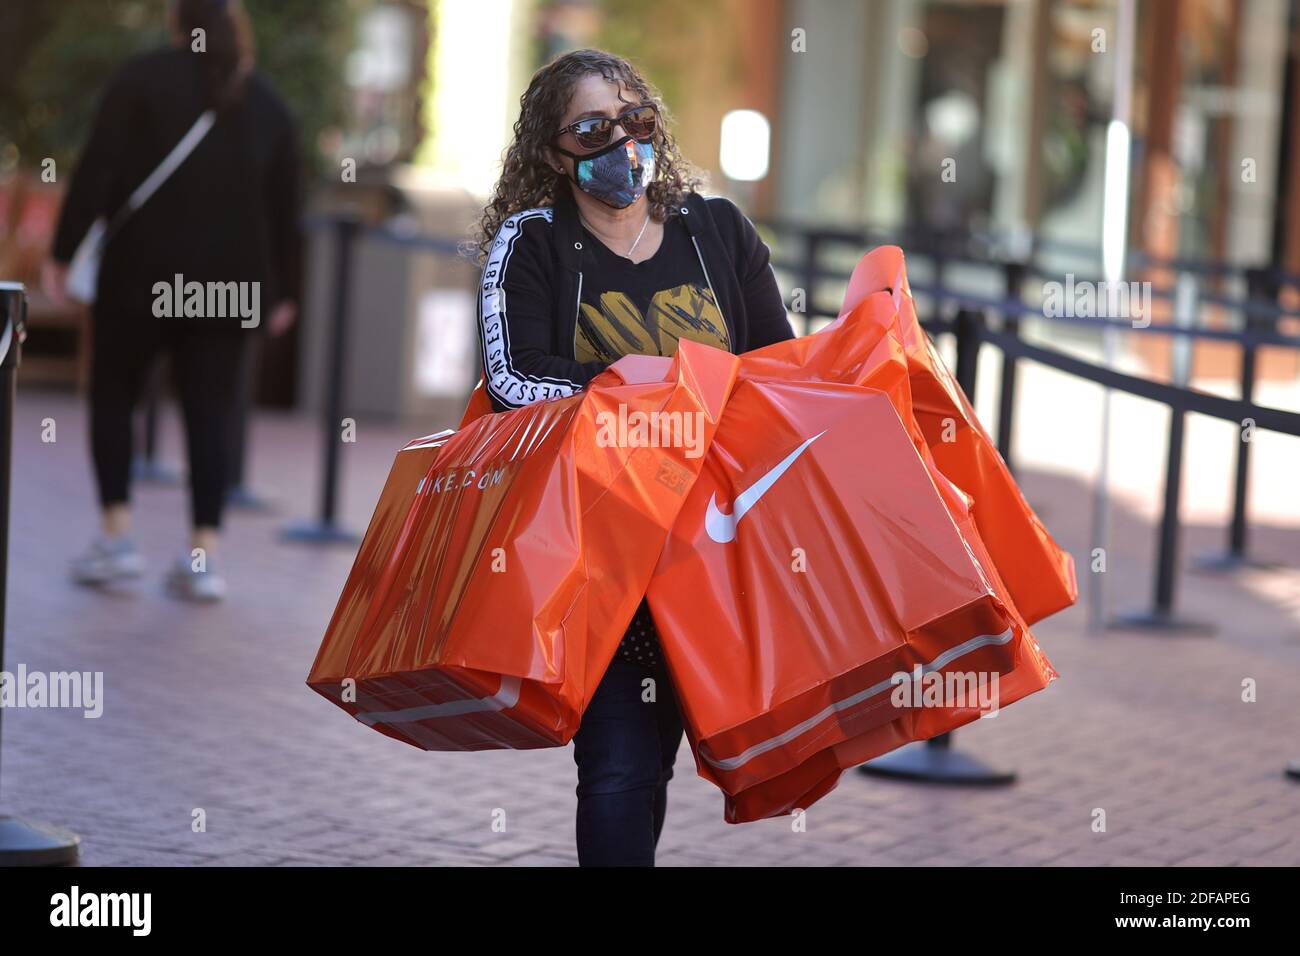 A woman carries Nike shopping bags at the Citadel Outlet mall, as the  global outbreak of